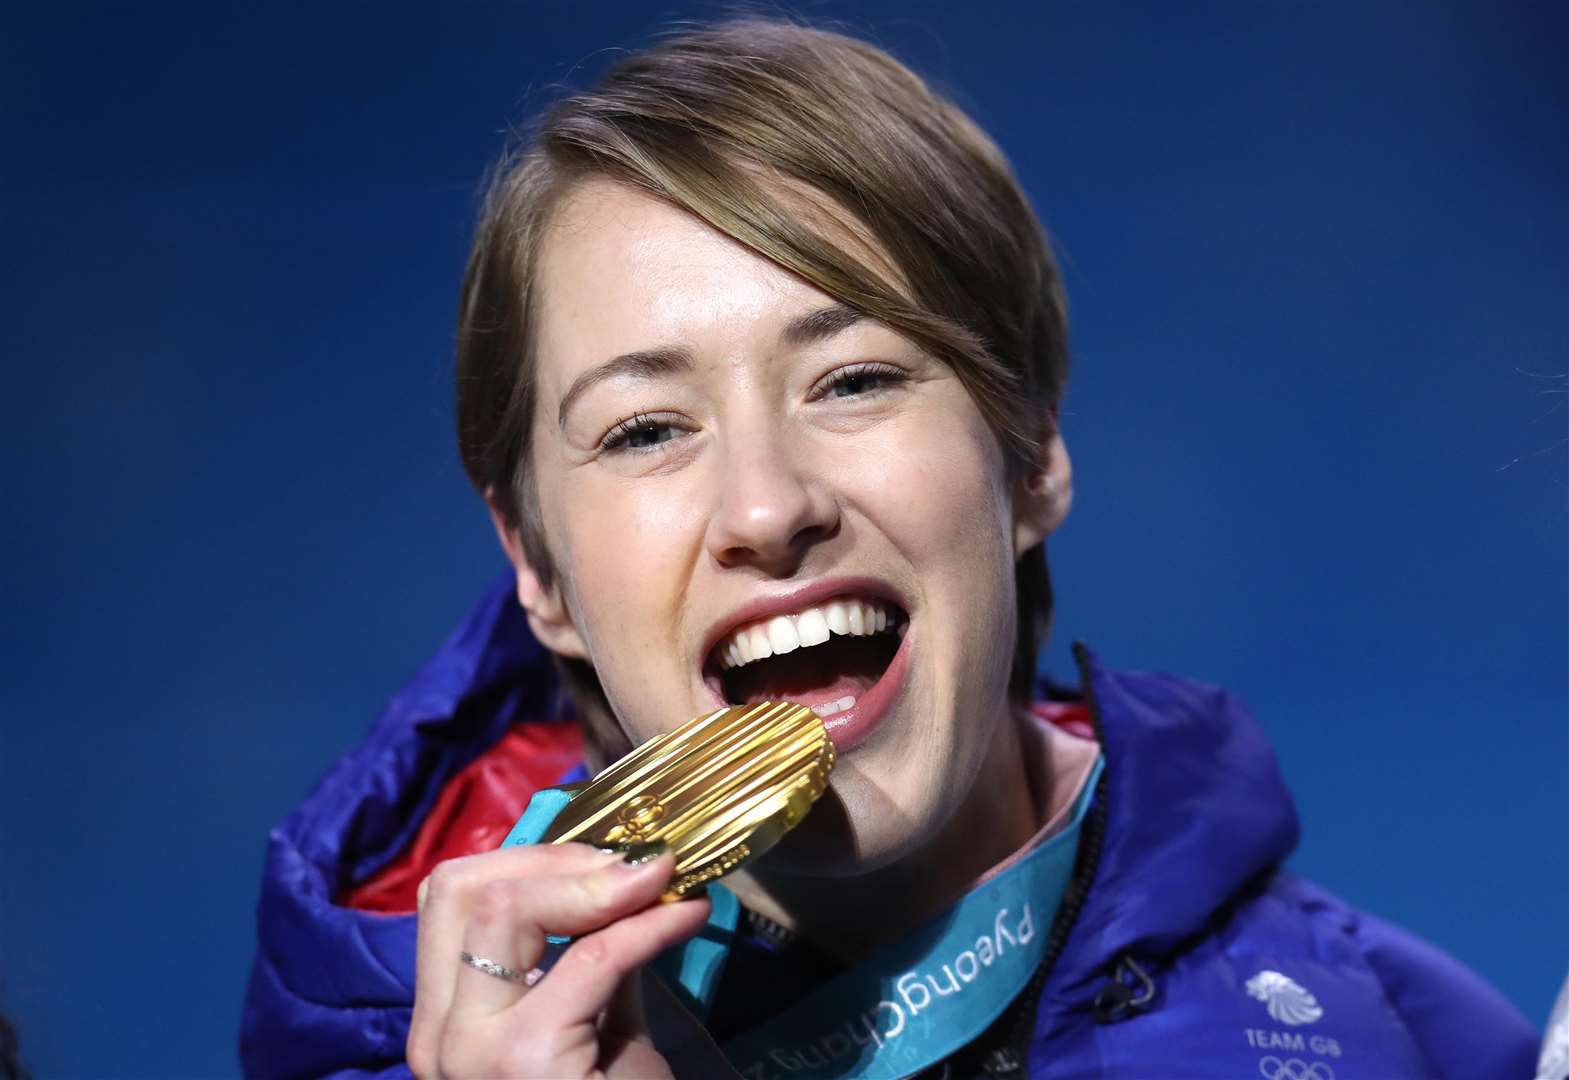 Lizzy Yarnold with her gold medal at the PyeongChang 2018 Winter Olympic Games Picture: Mike Egerton/PA Wire